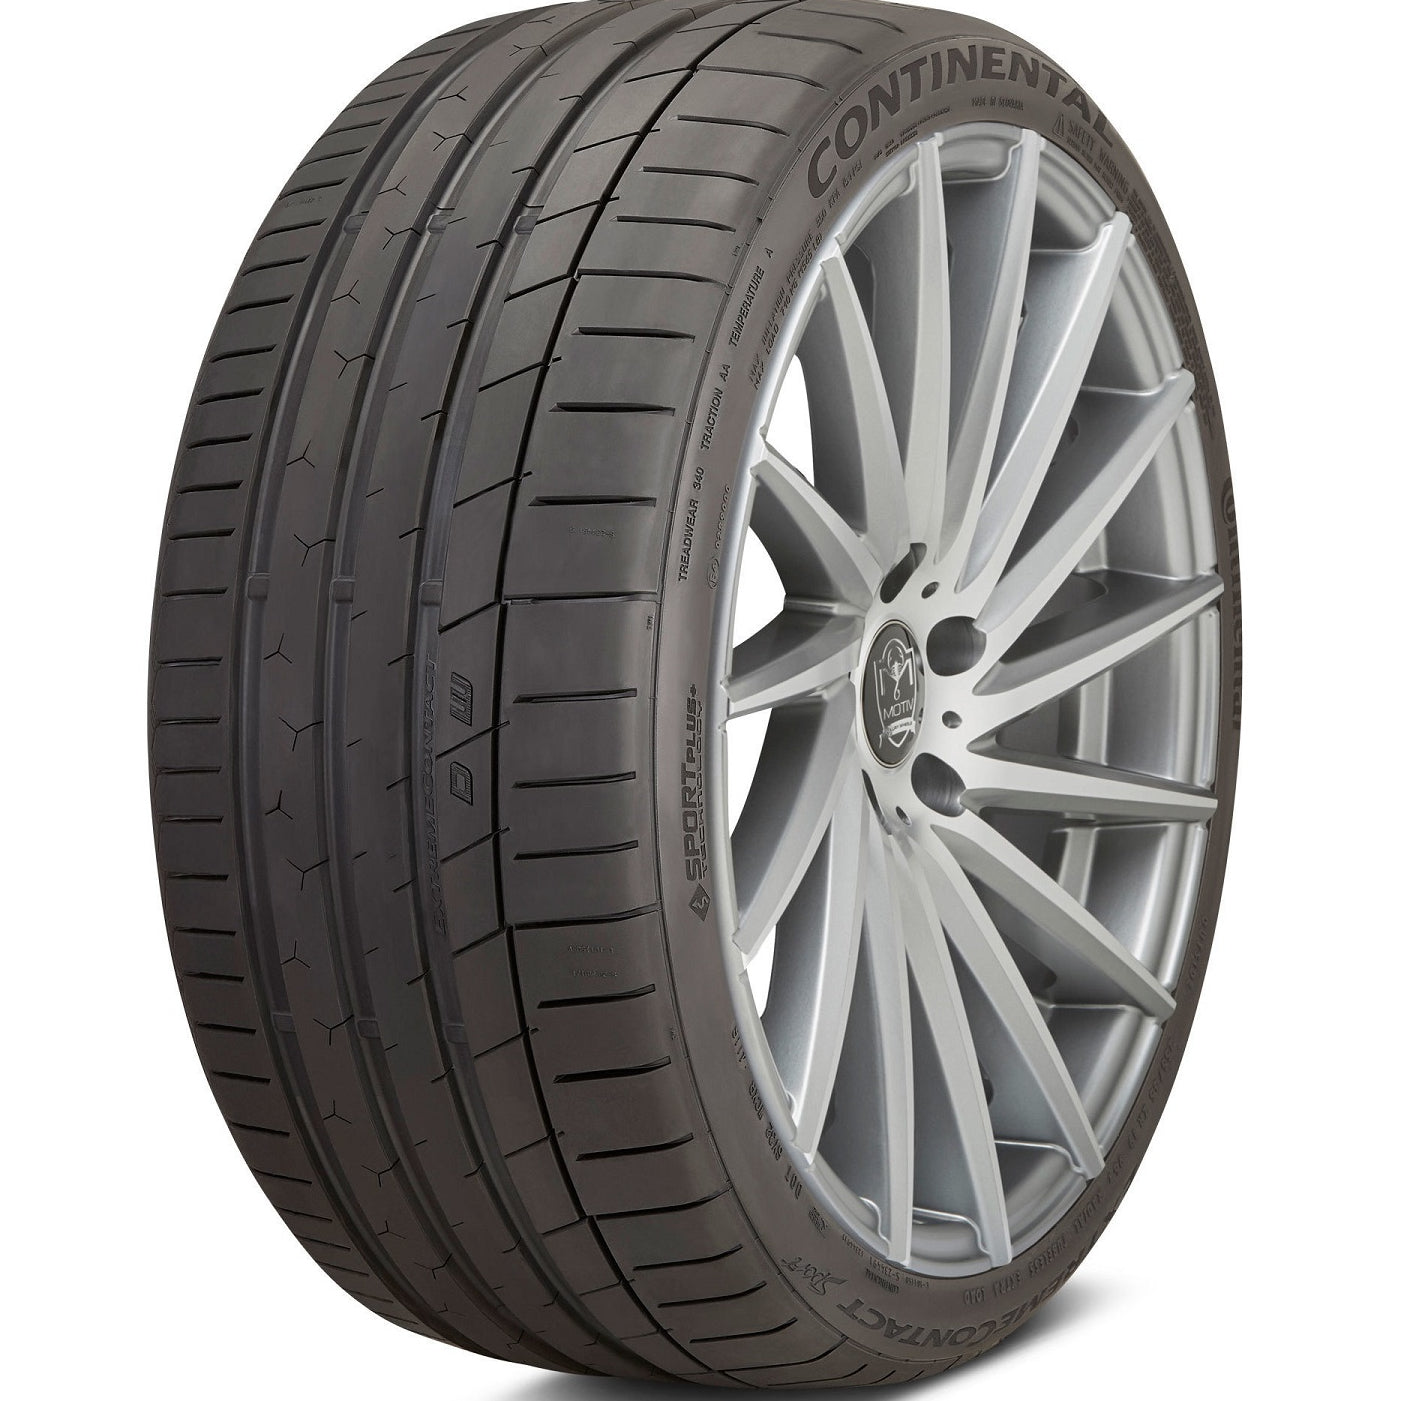 CONTINENTAL EXTREMECONTACT SPORT 235/40ZR19 (26.4X9.3R 19) Tires